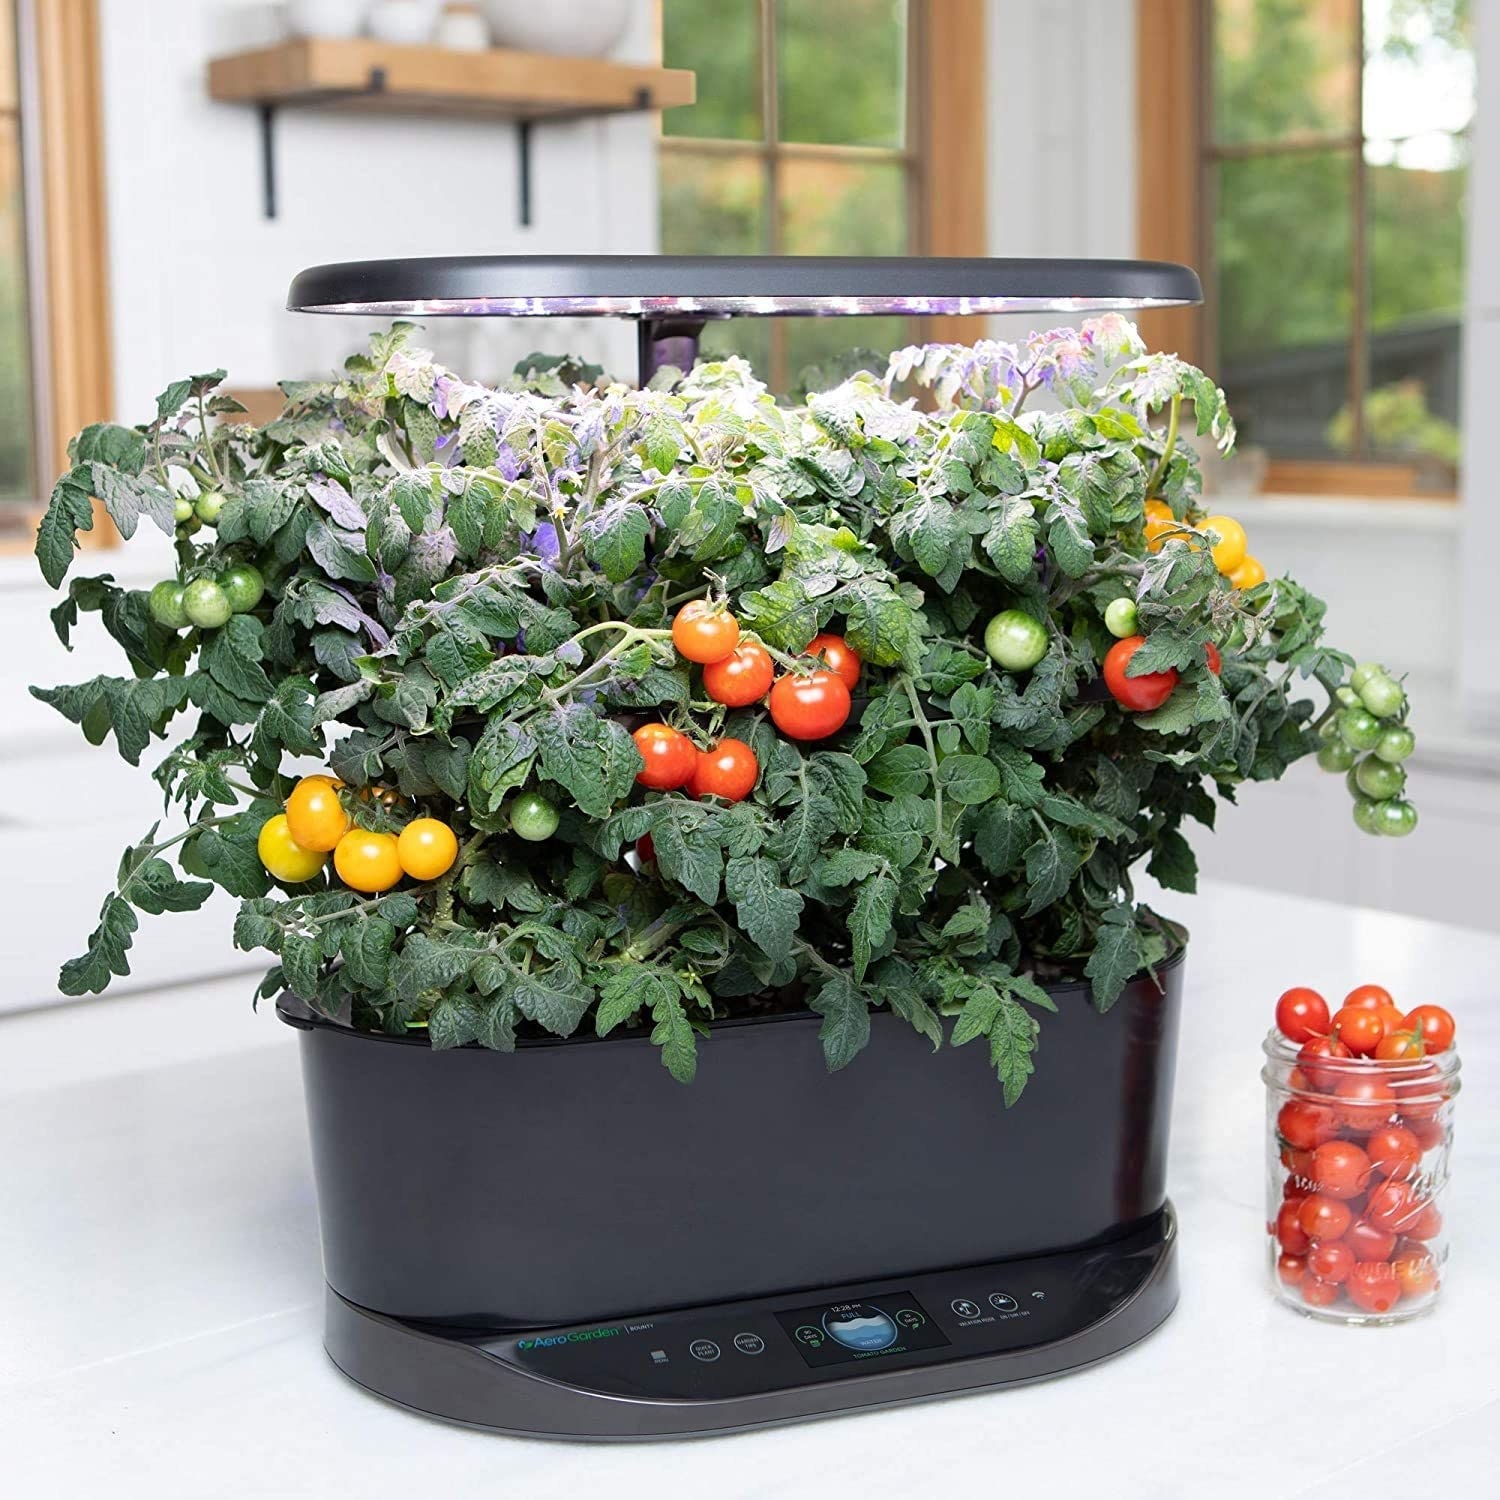 The black AeroGarden with a full tomato crop growing